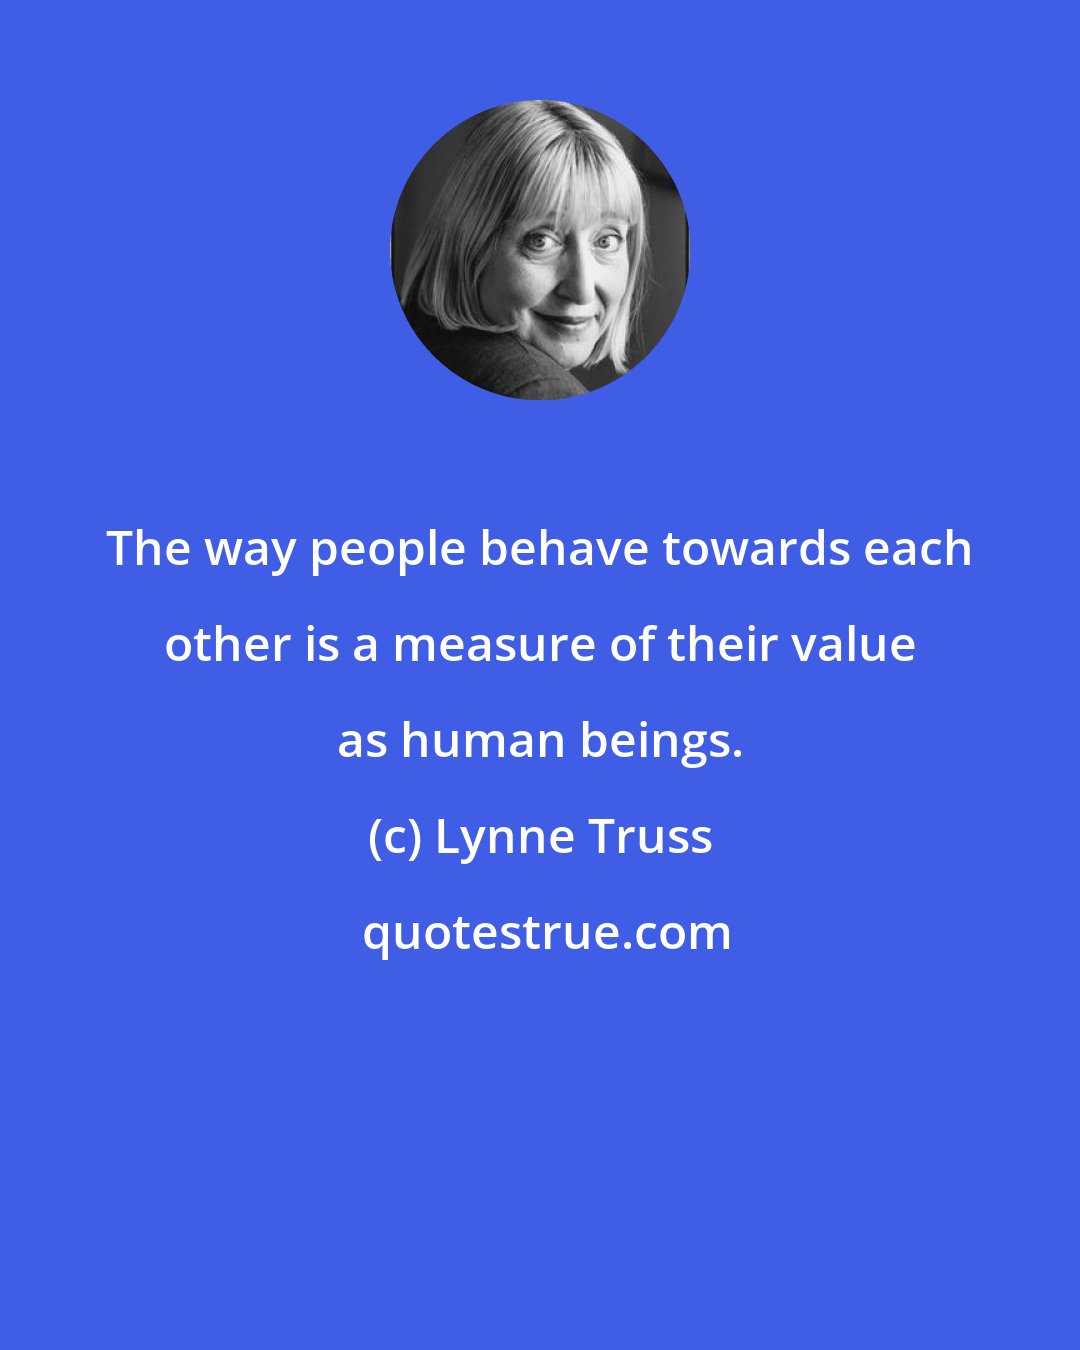 Lynne Truss: The way people behave towards each other is a measure of their value as human beings.